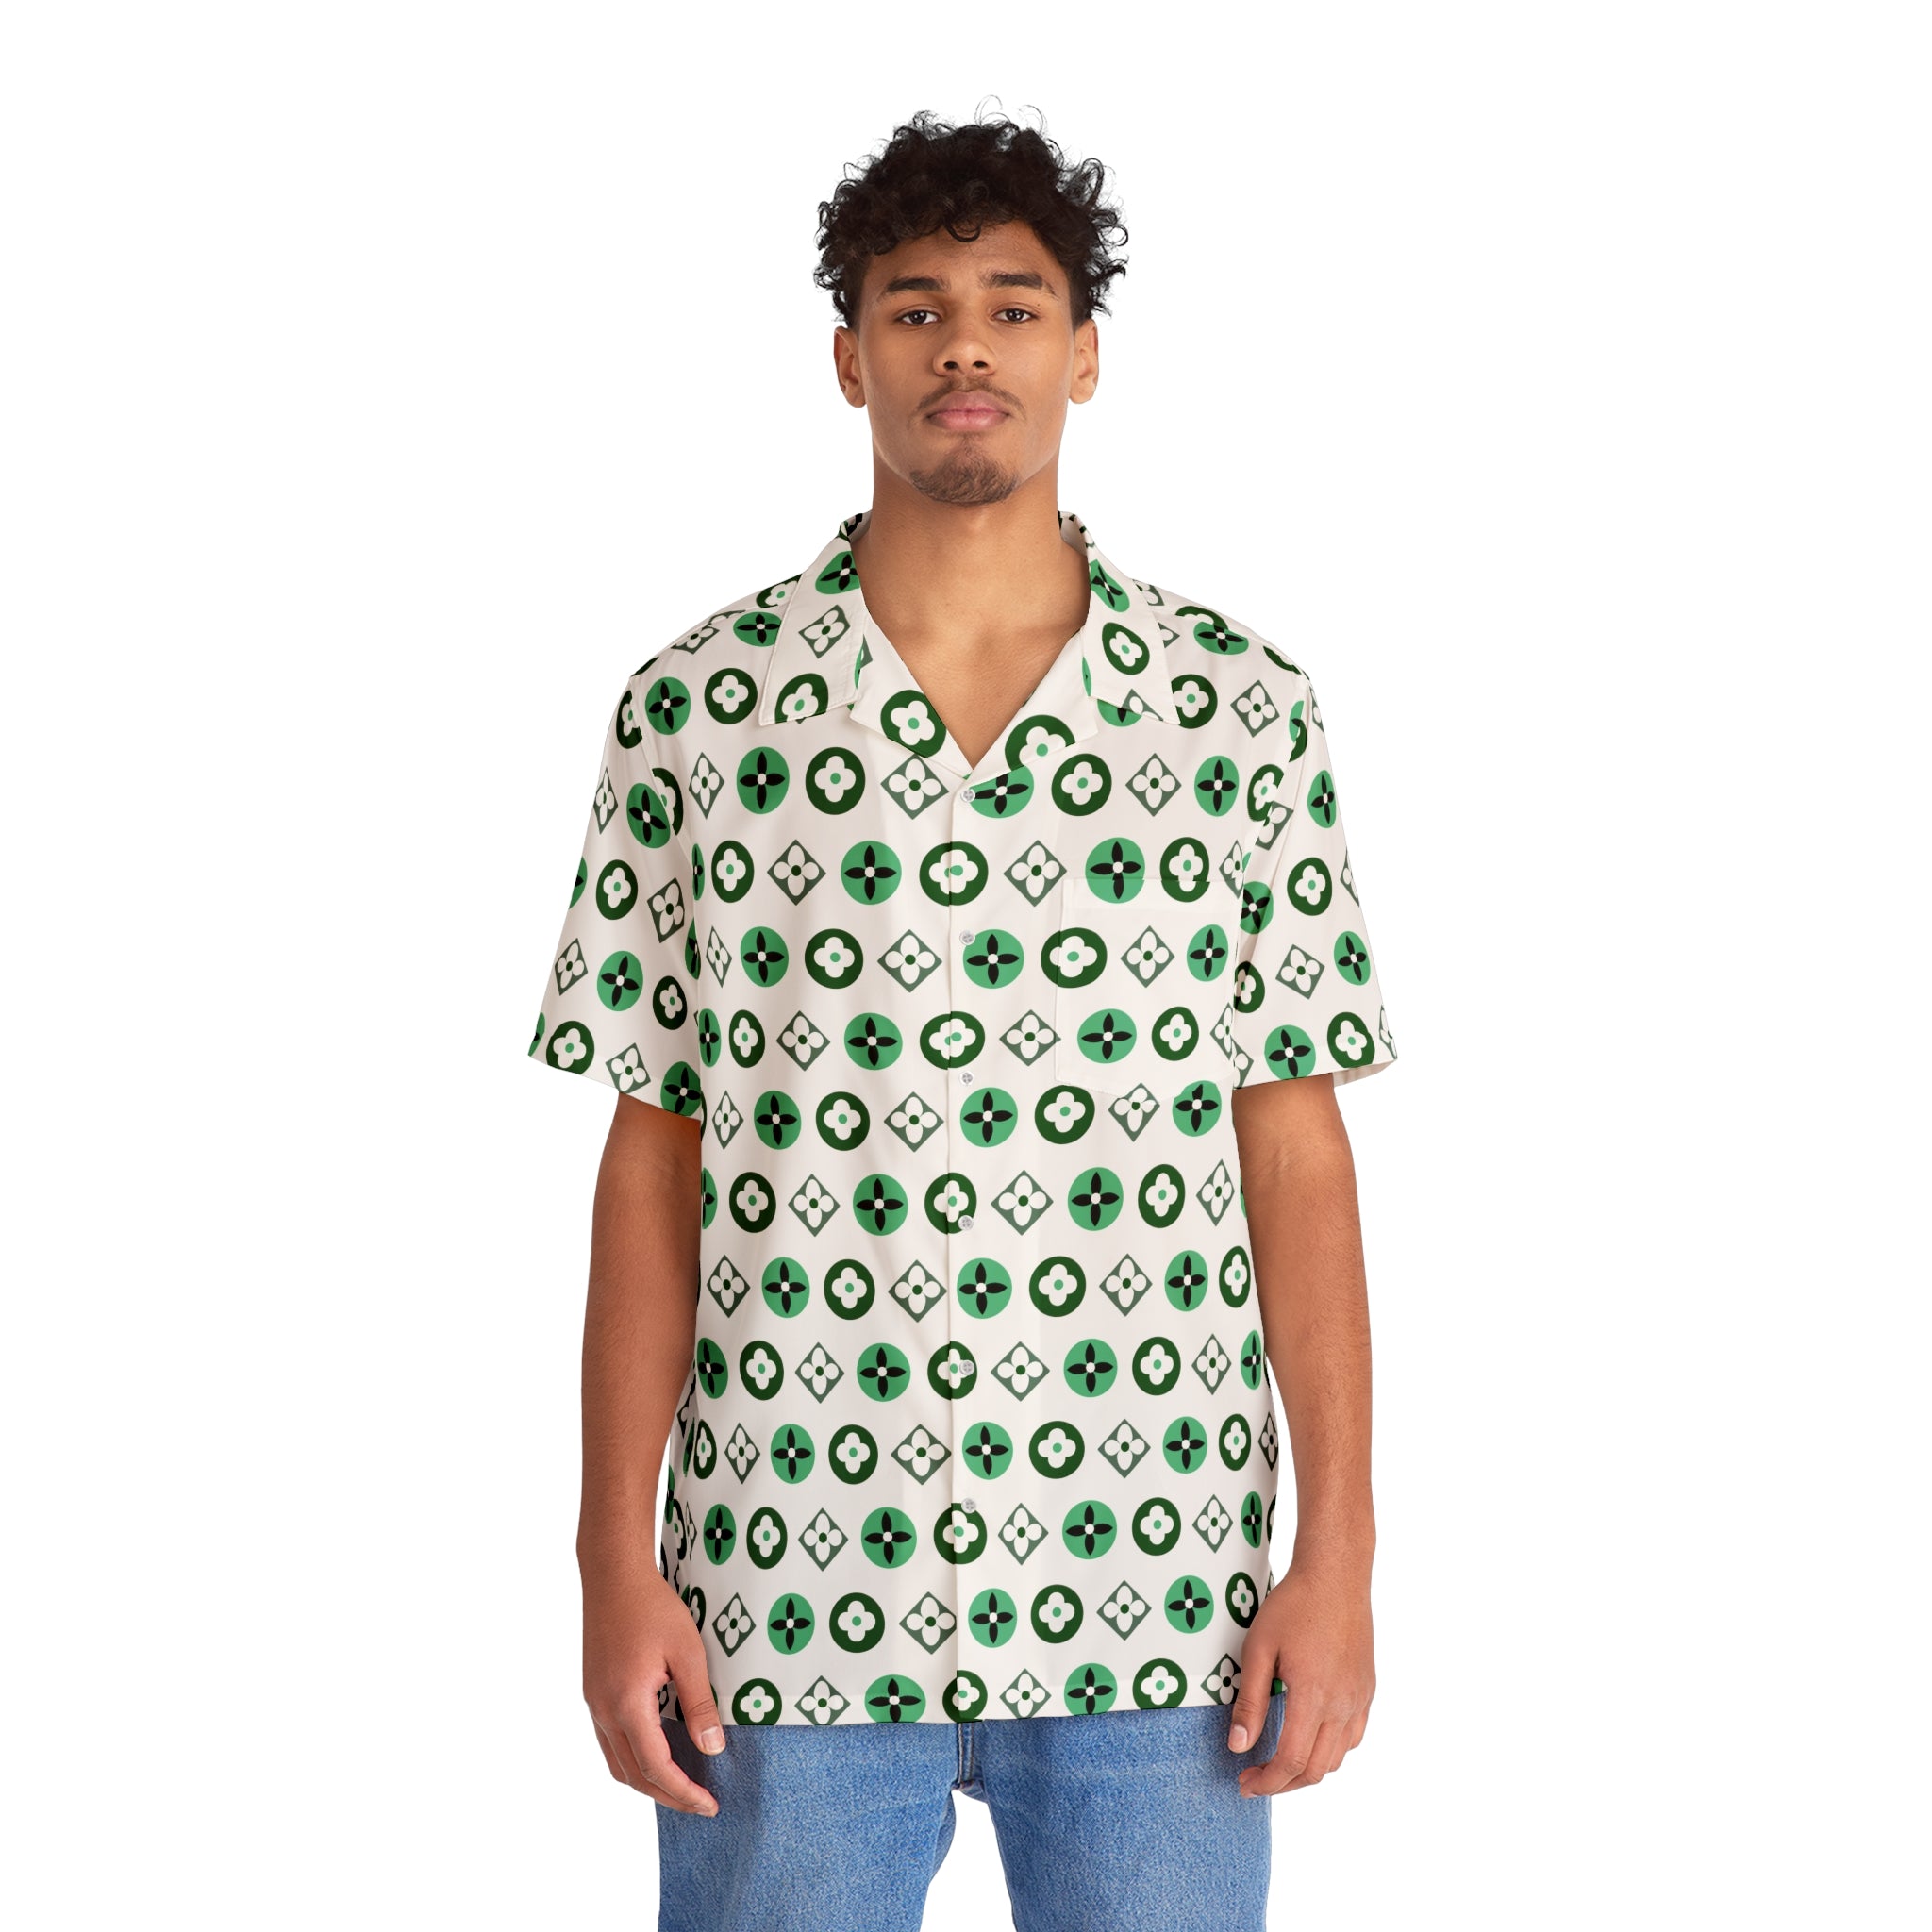 Groove Collection Trilogy of Icons Pattern (Greens) White Unisex Gender Neutral Button Up Shirt, Hawaiian Shirt